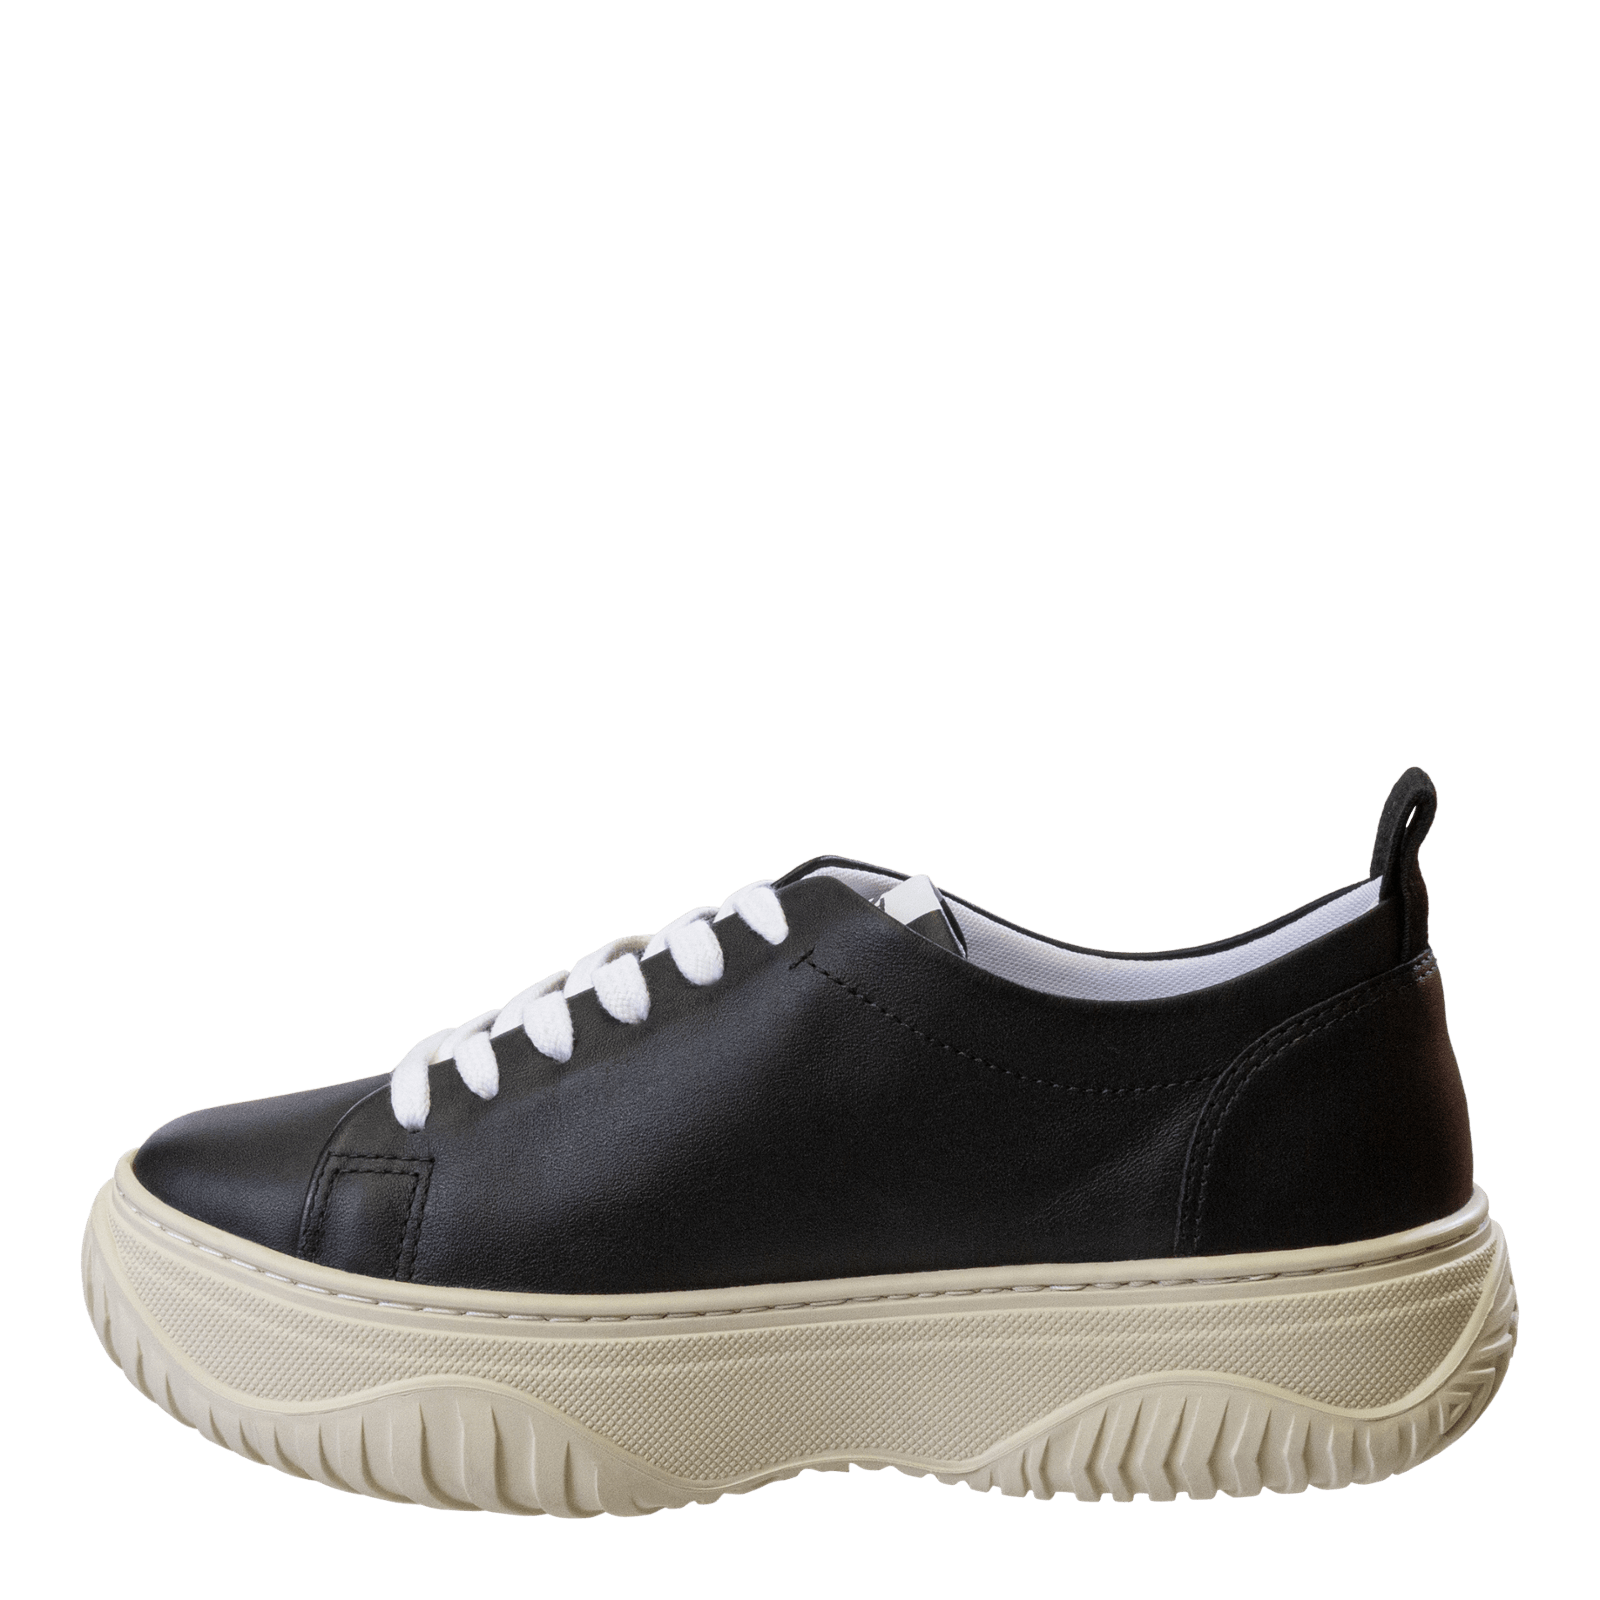 PANGEA in BLACK Court Sneakers - OTBT shoes